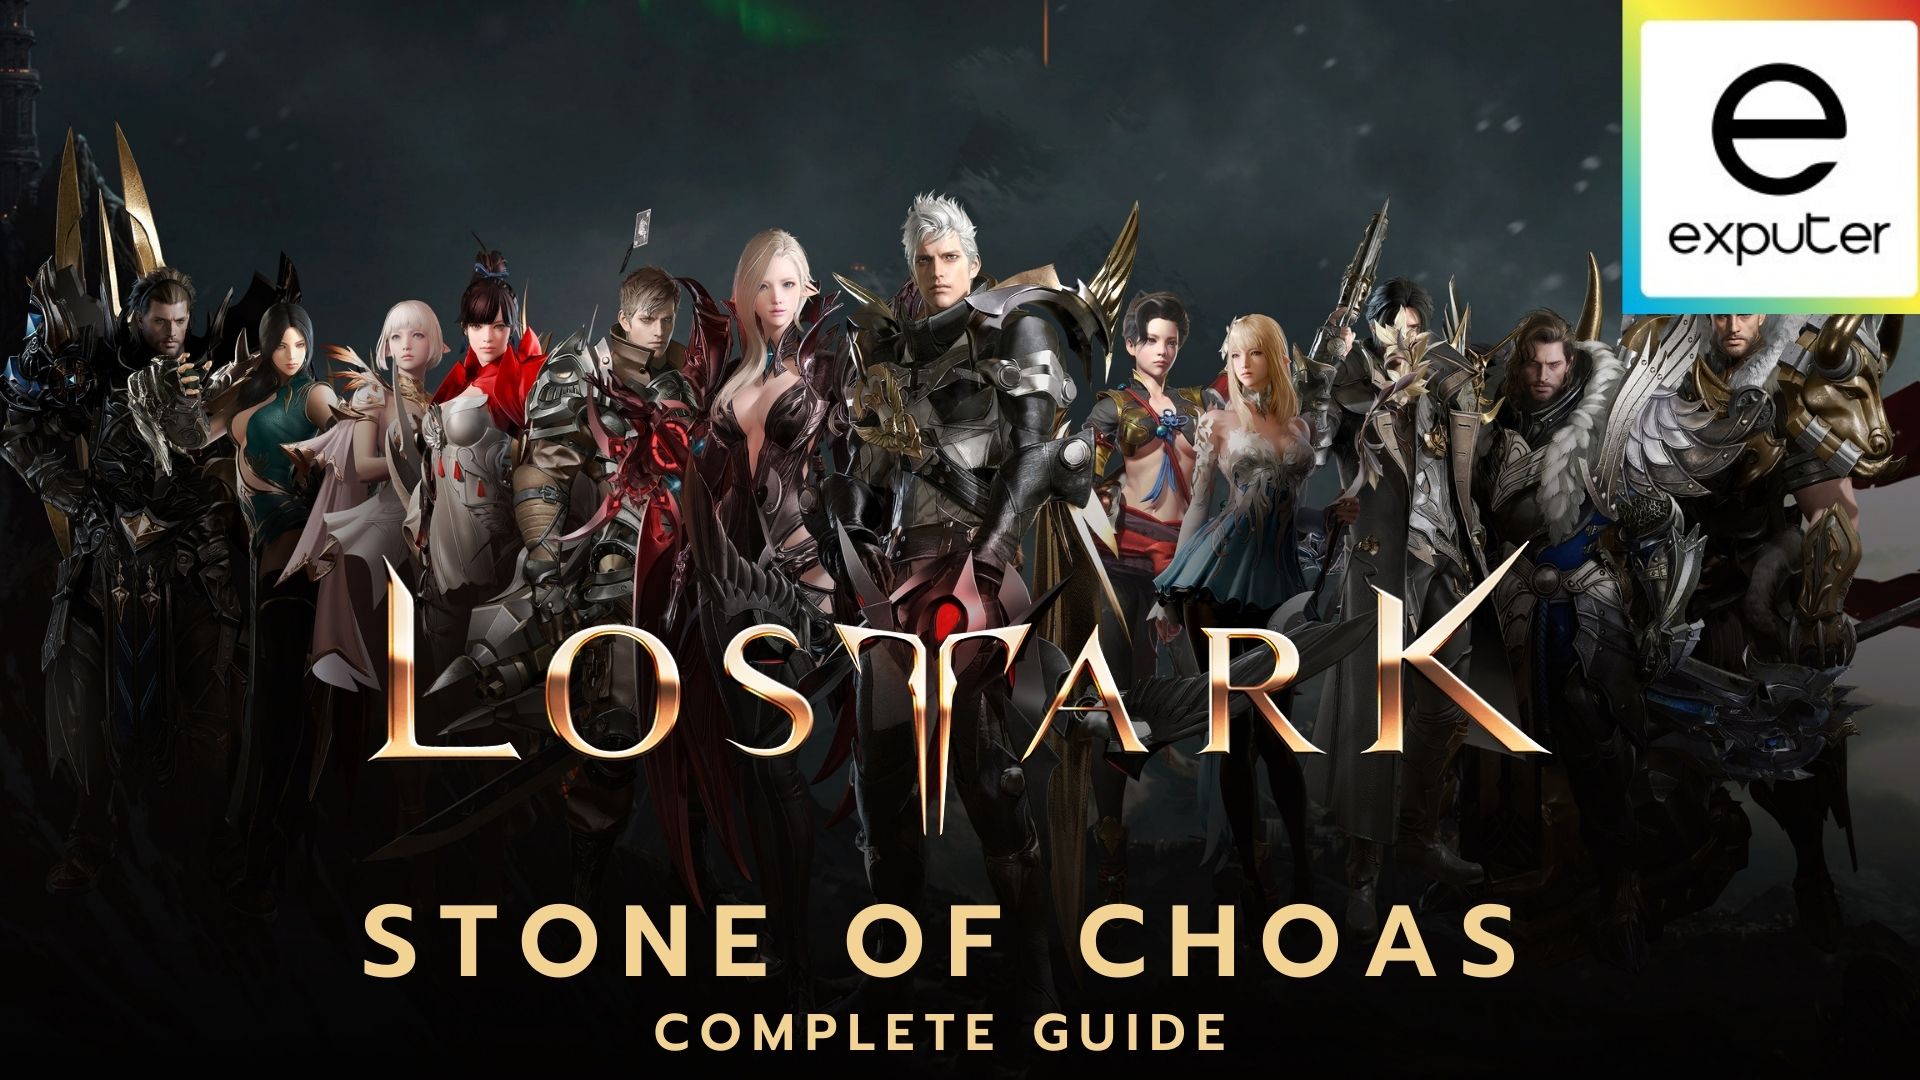 Lost Ark Stone of Chaos: How To Get [3 Best Ways] - eXputer.com